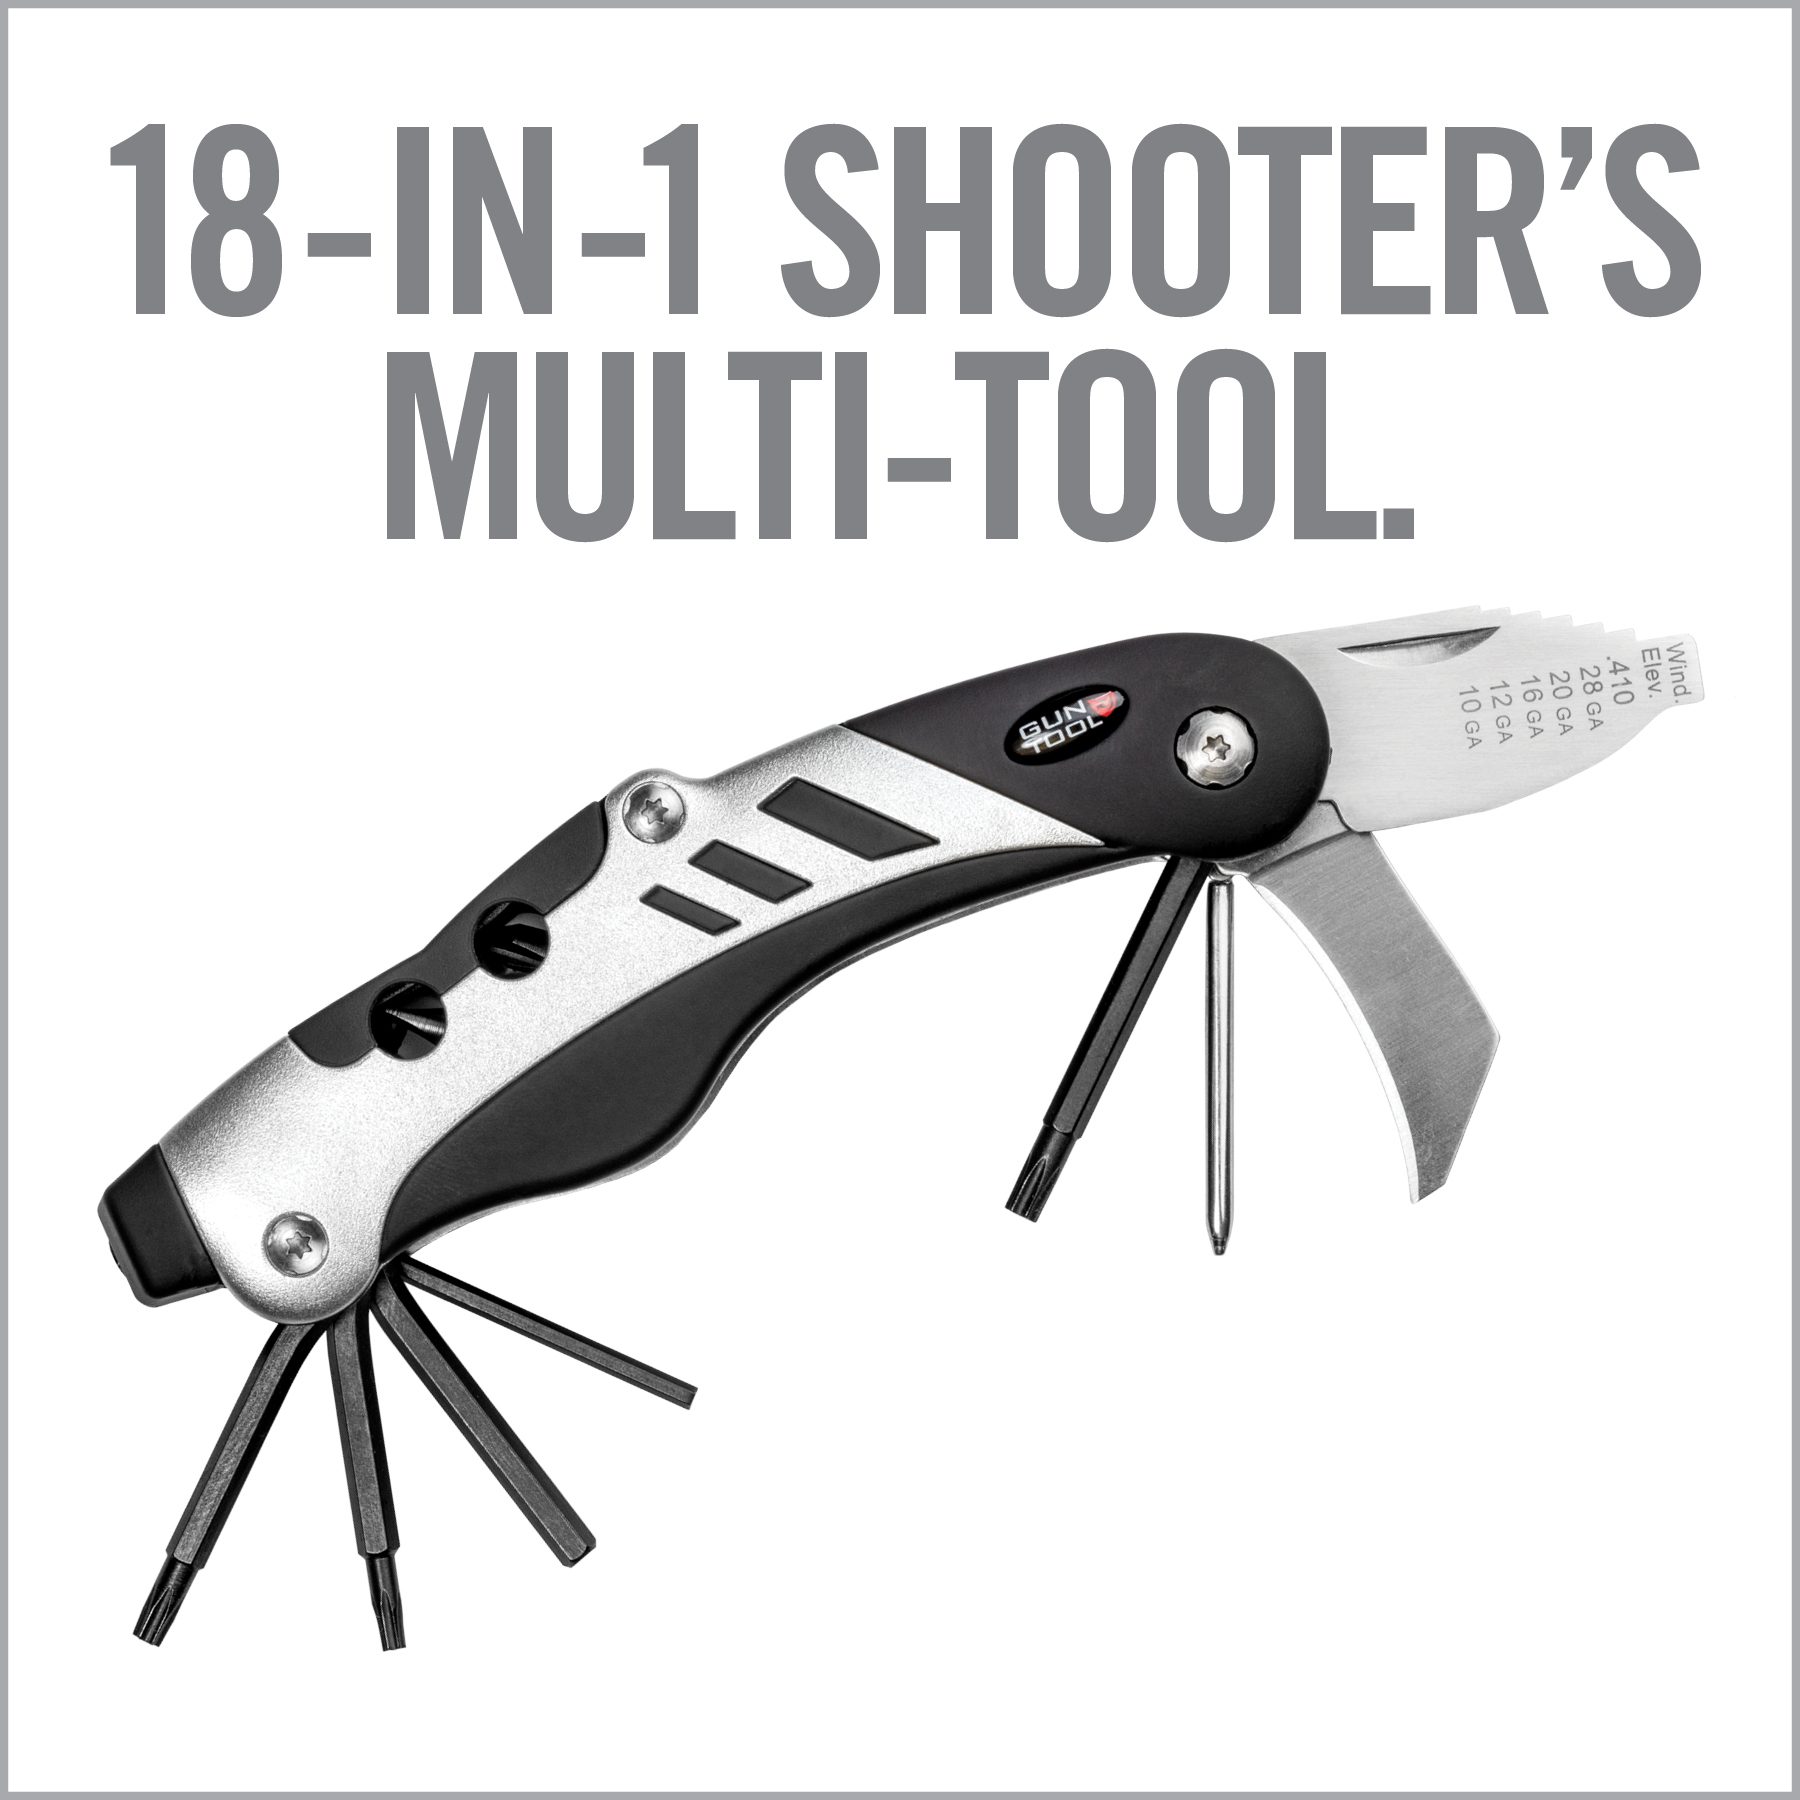 a multi - tool with the words 18 - in - 1 shooter's multi - tool